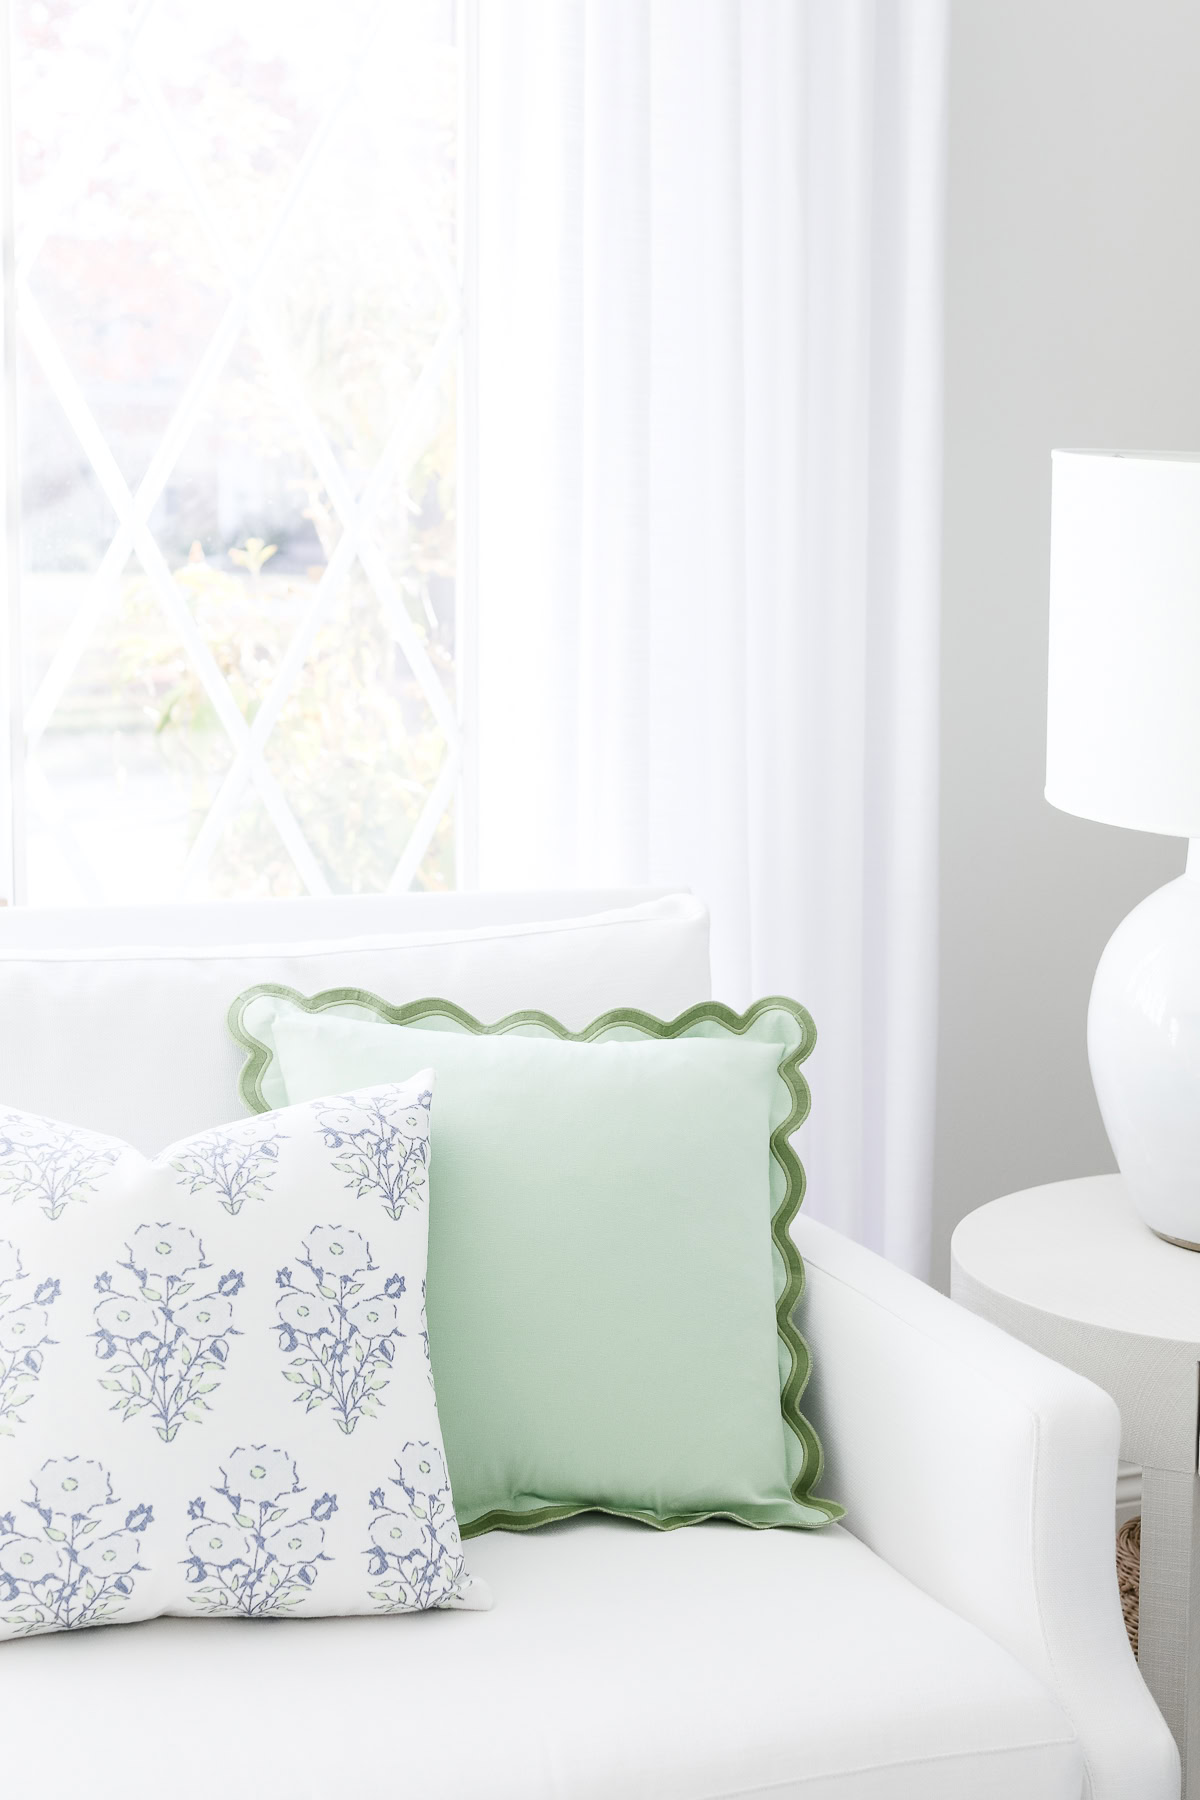 A white couch with two decorative pillows—a green one with scalloped edges and a white one with a blue floral pattern—next to a round white side table with a white lamp.